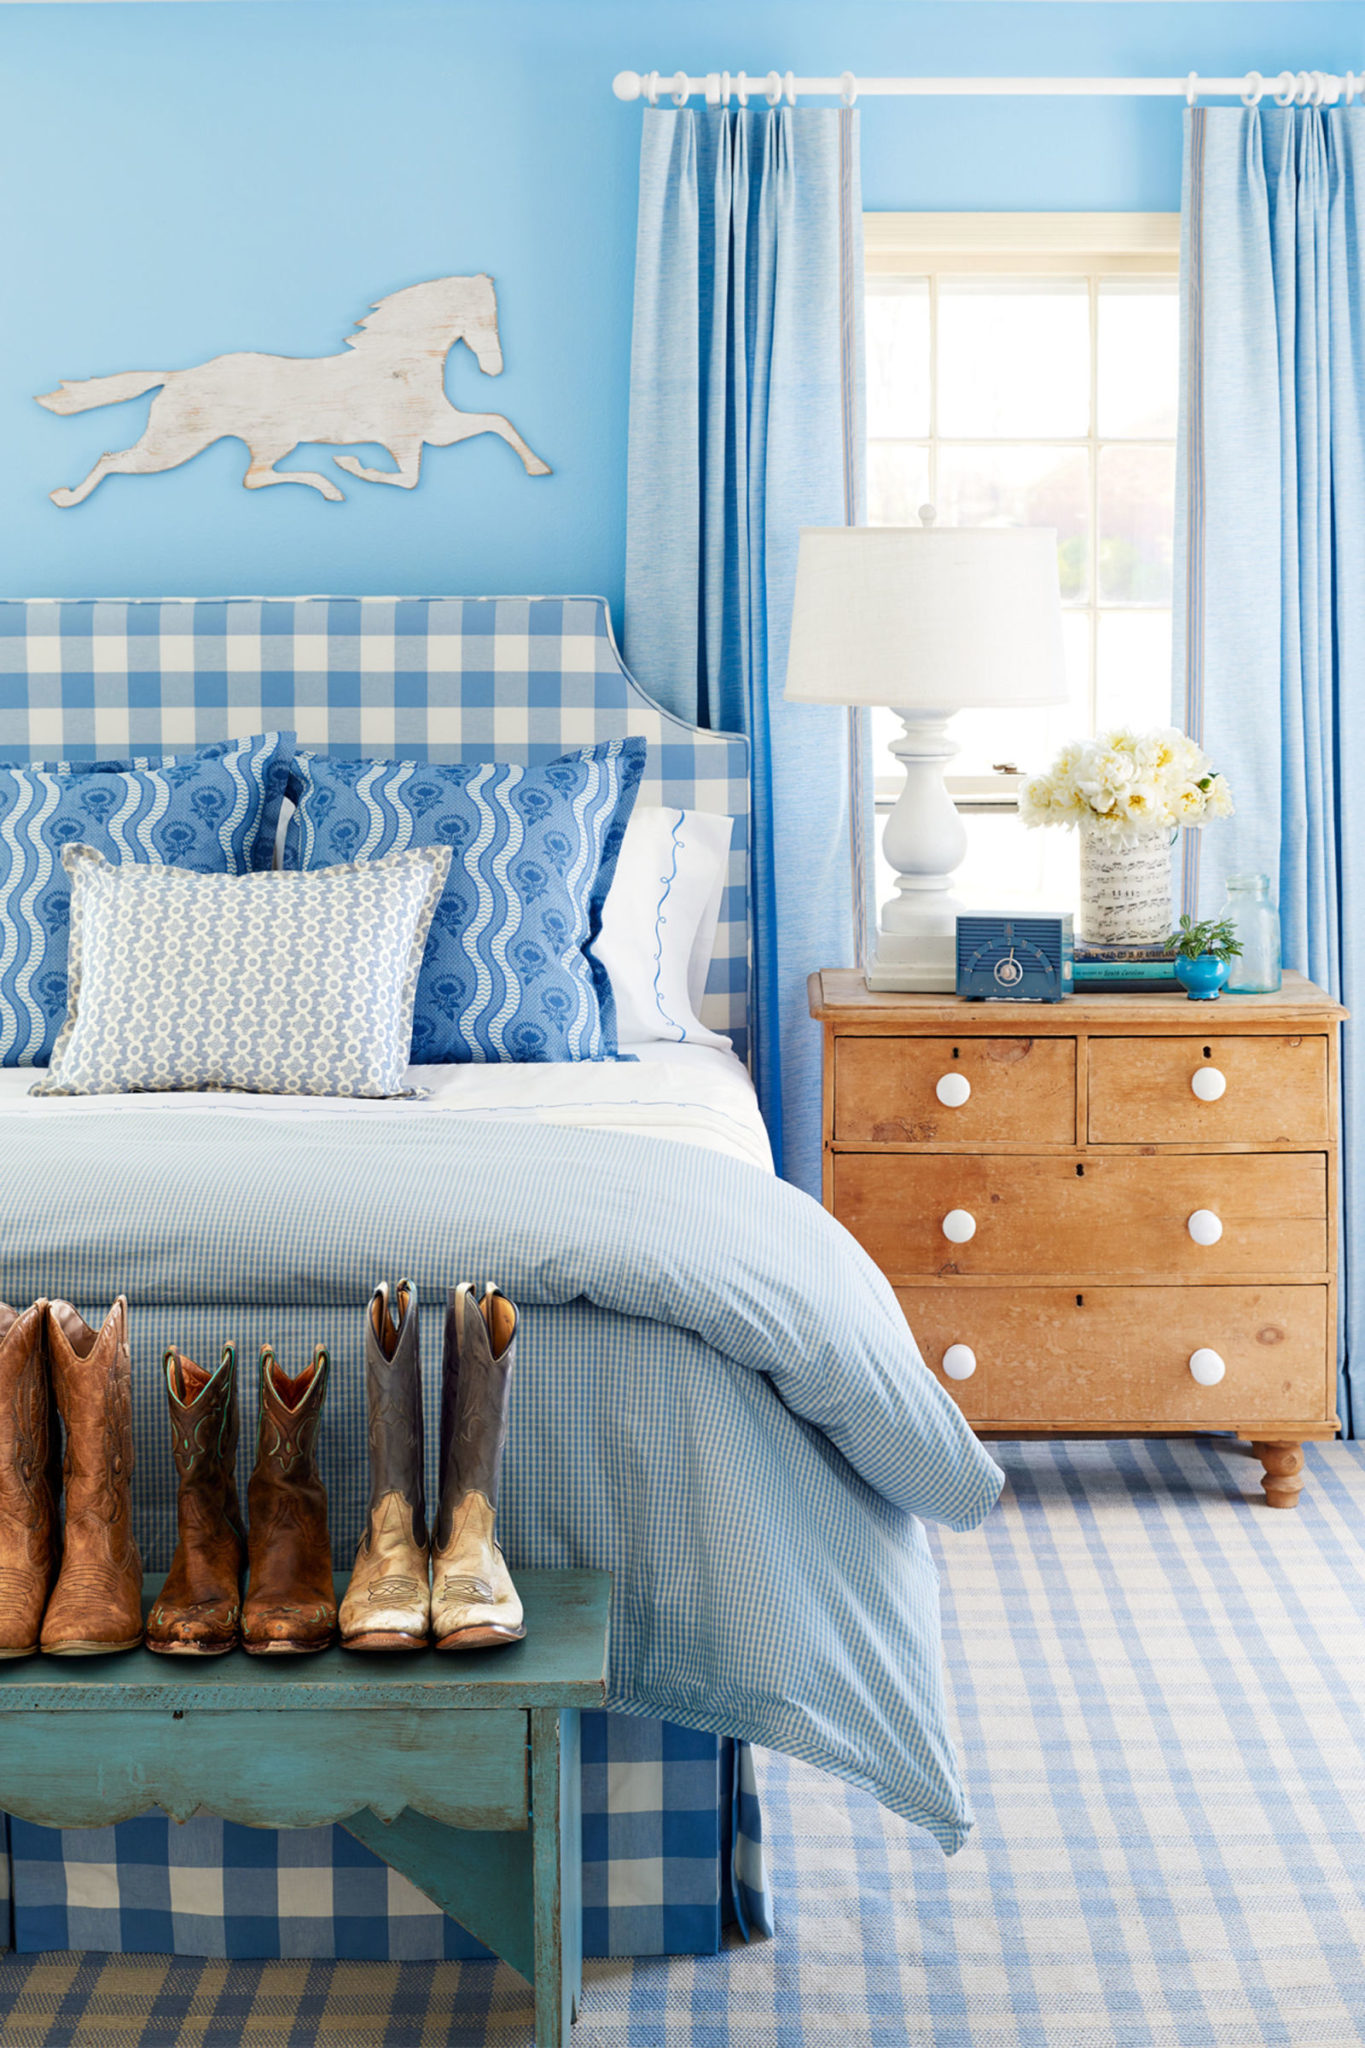 Fresh-and-youthful-blue-bedroom-with-shabby-chic-elements